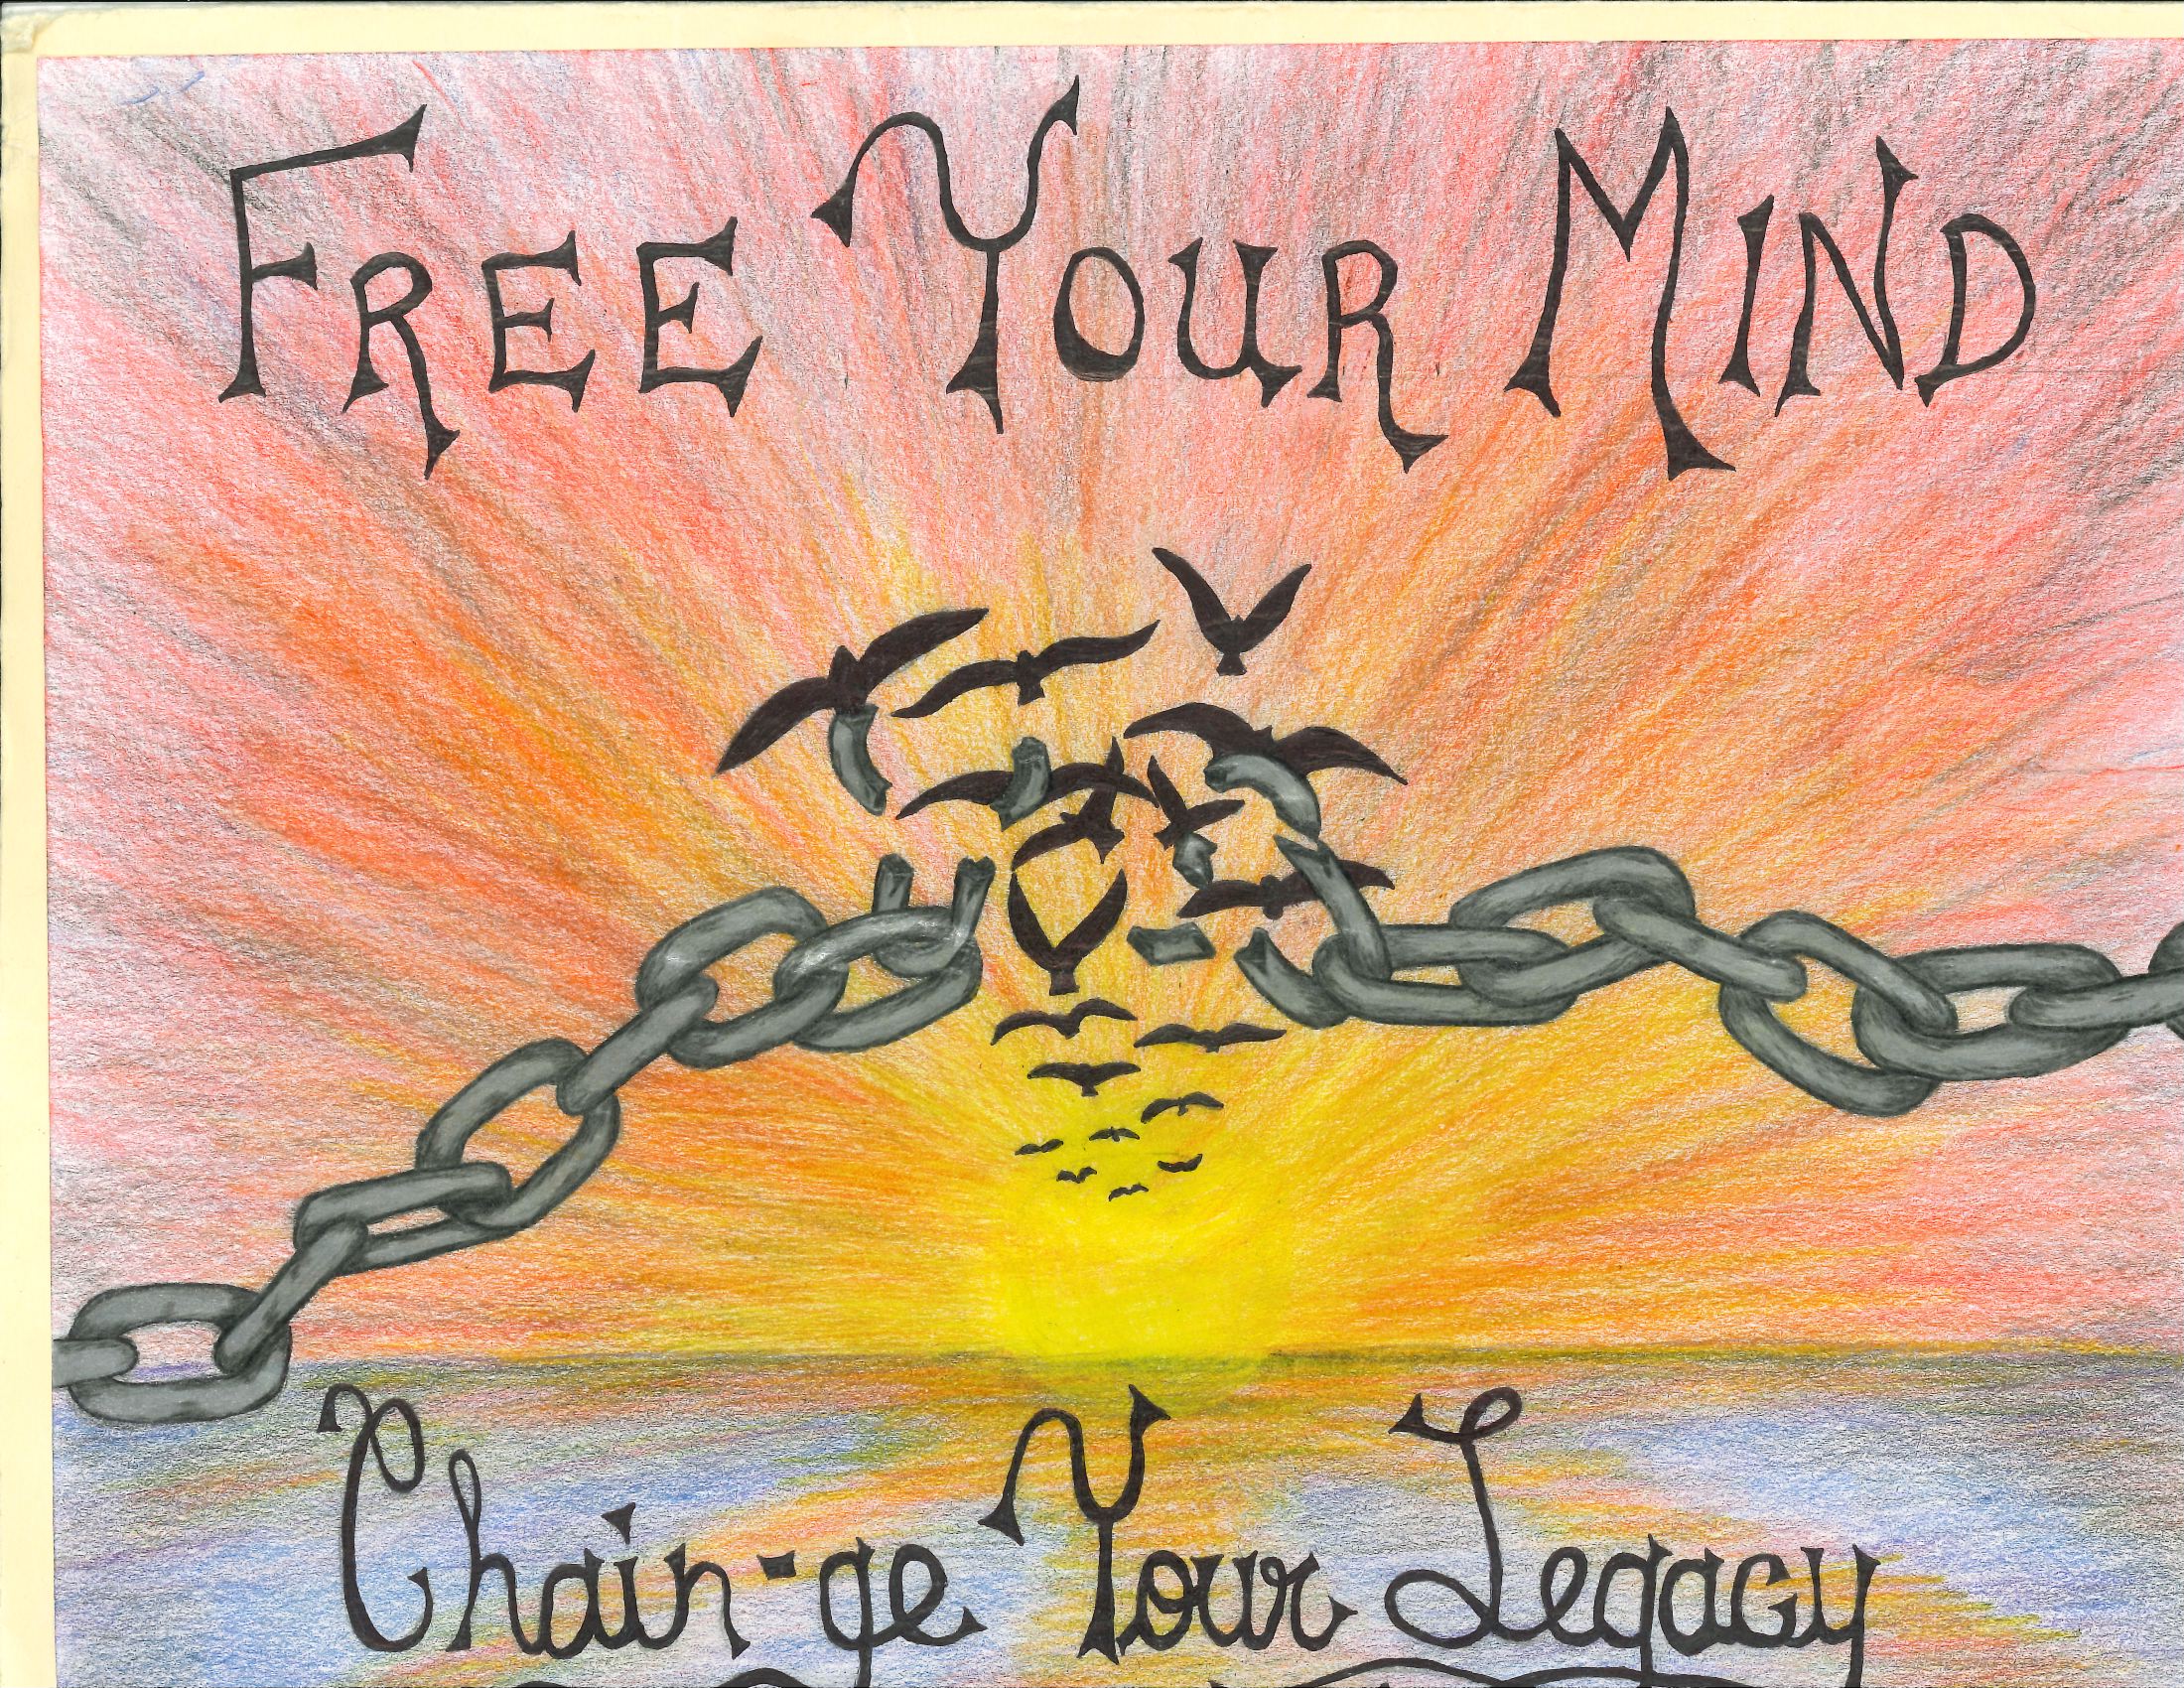 A drawing that says "Free your mind" and features birds flying through a chain amidst a sunrise background